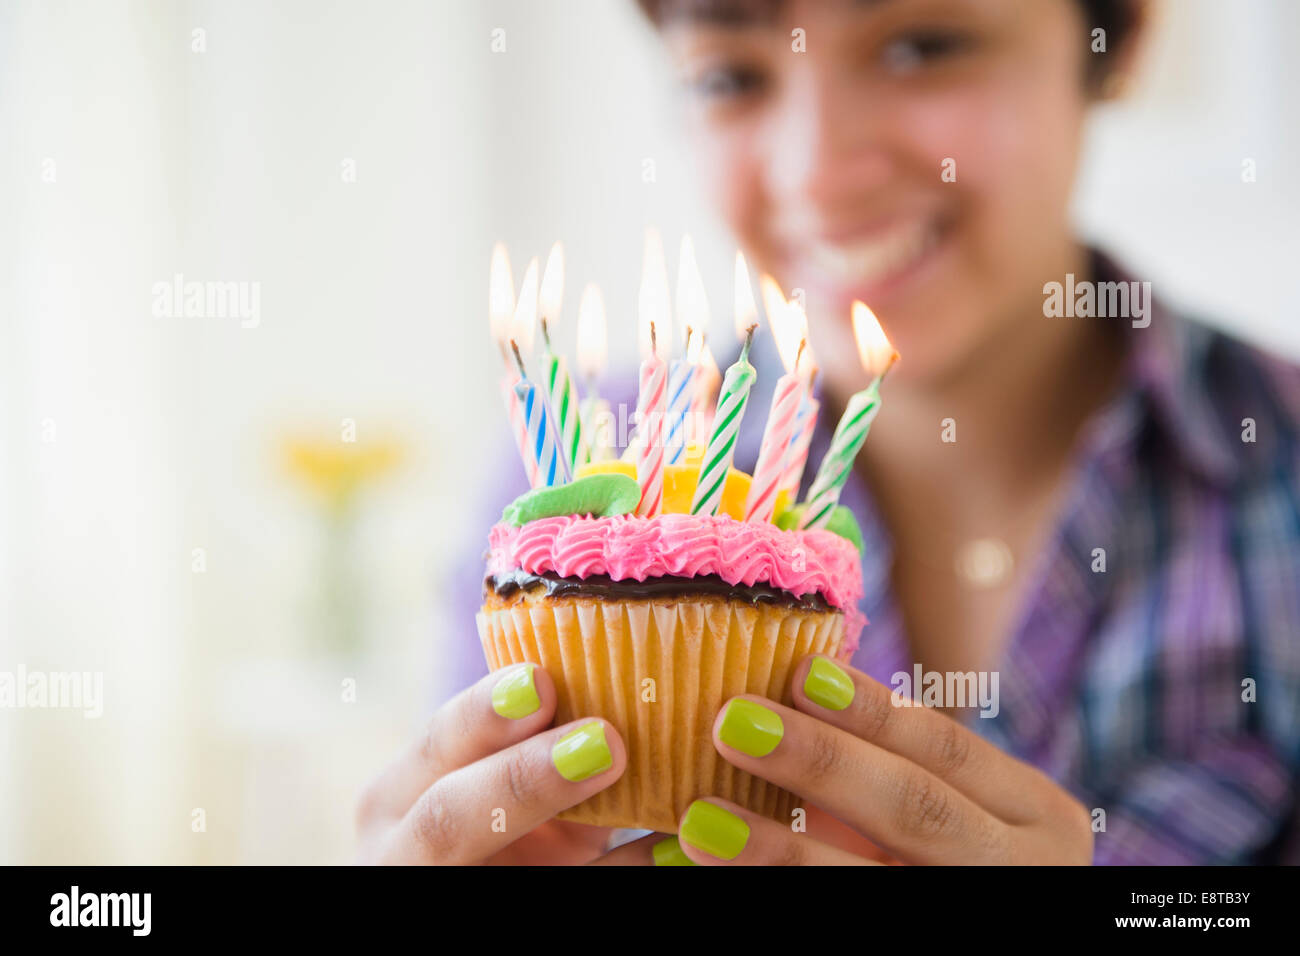 Mixed race woman holding cupcake with birthday candles Stock Photo